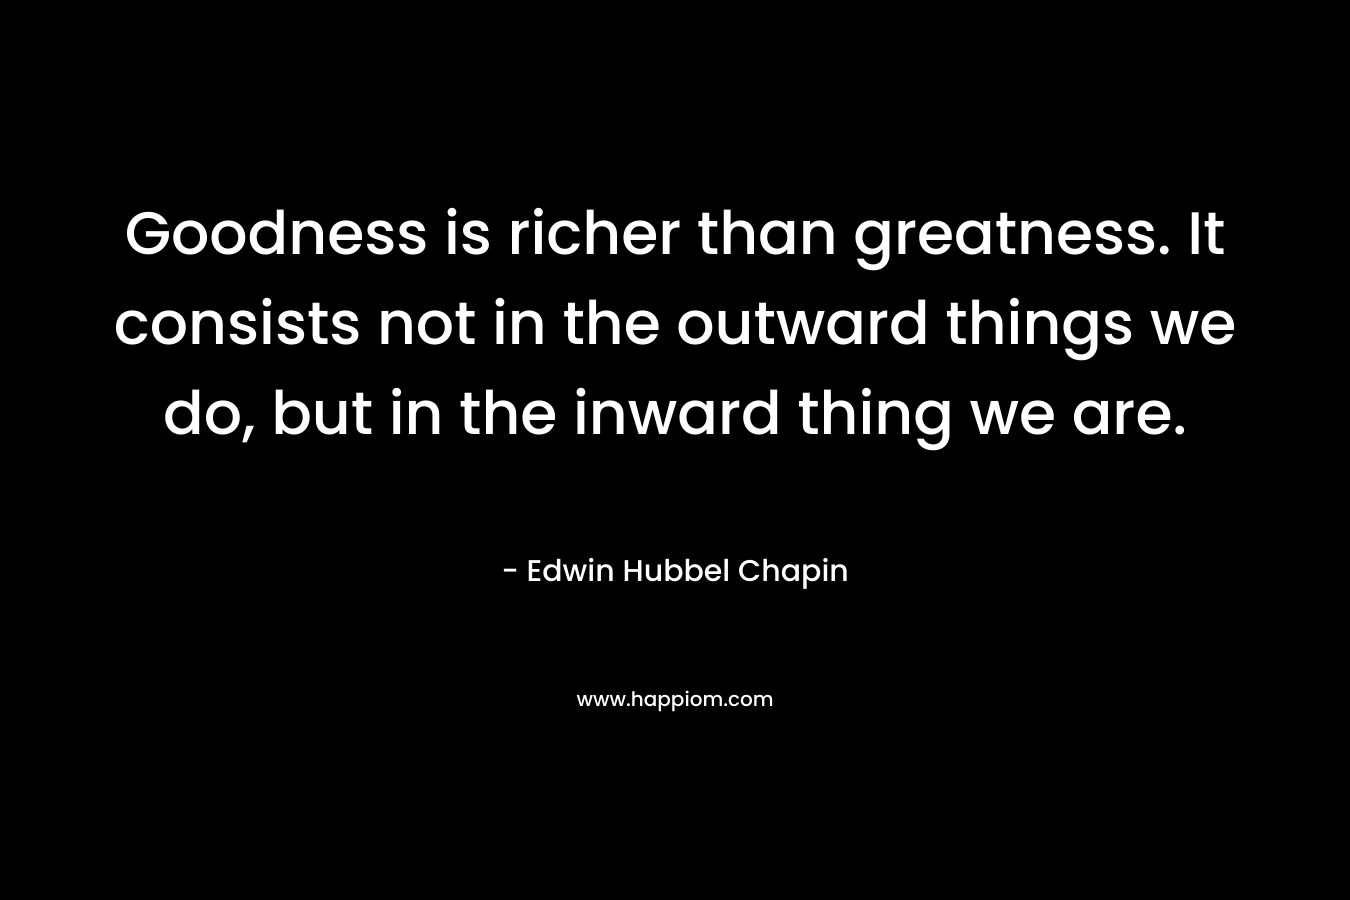 Goodness is richer than greatness. It consists not in the outward things we do, but in the inward thing we are.